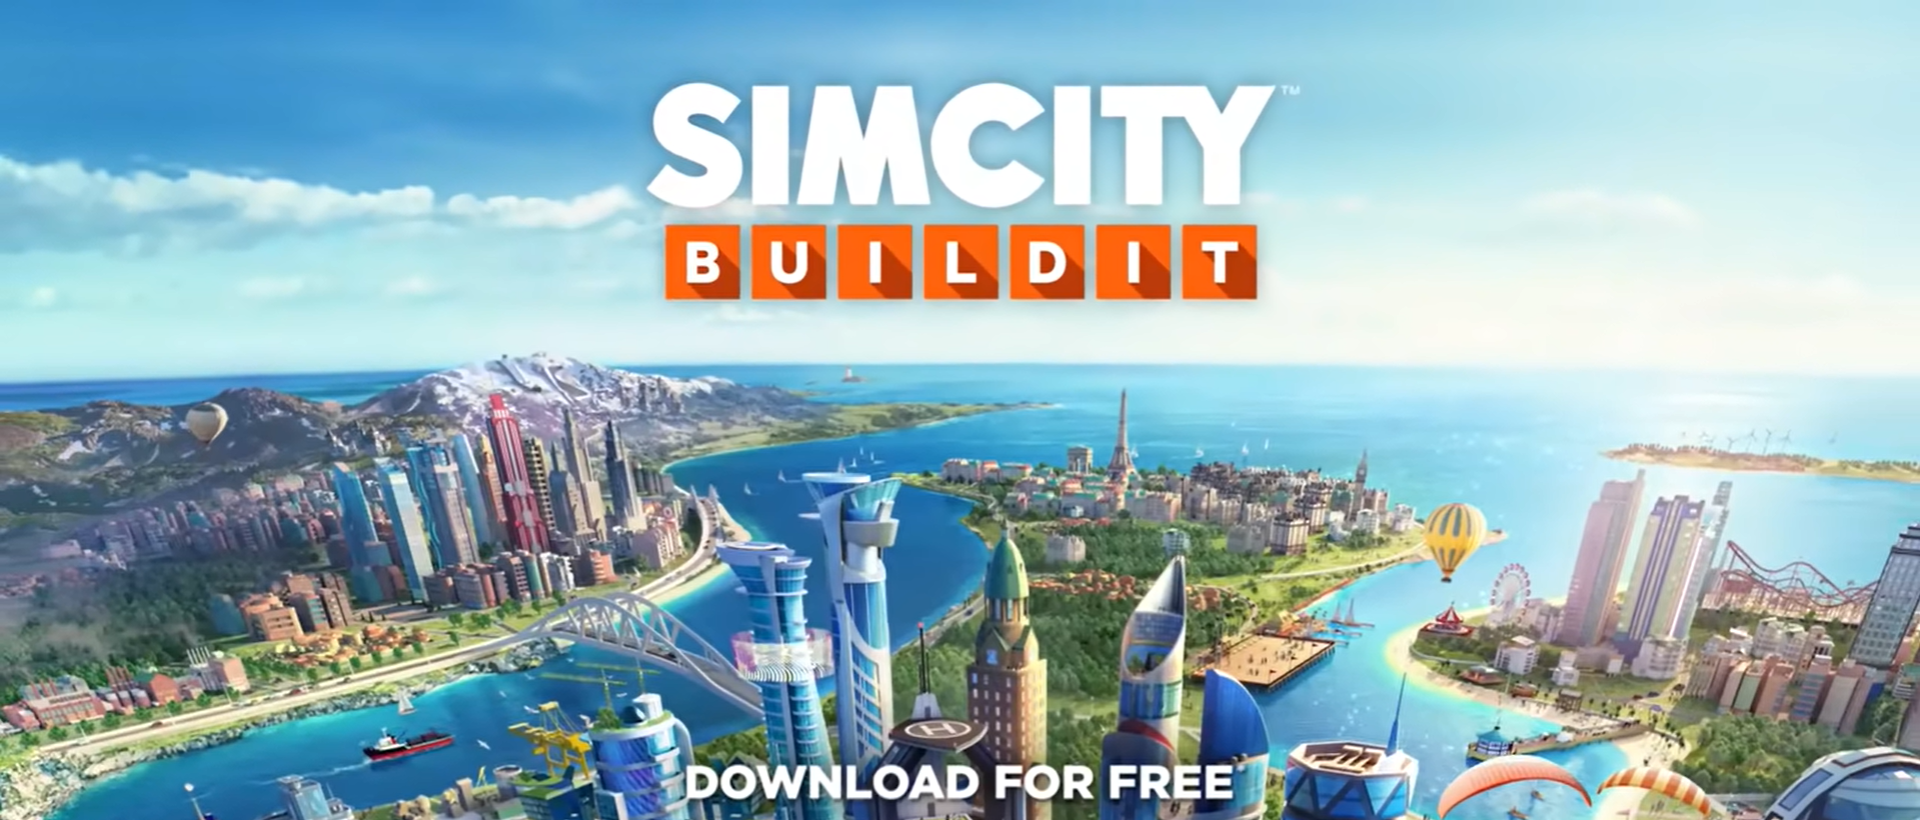 Free download simcity buildit for pc download free adobe reader 8